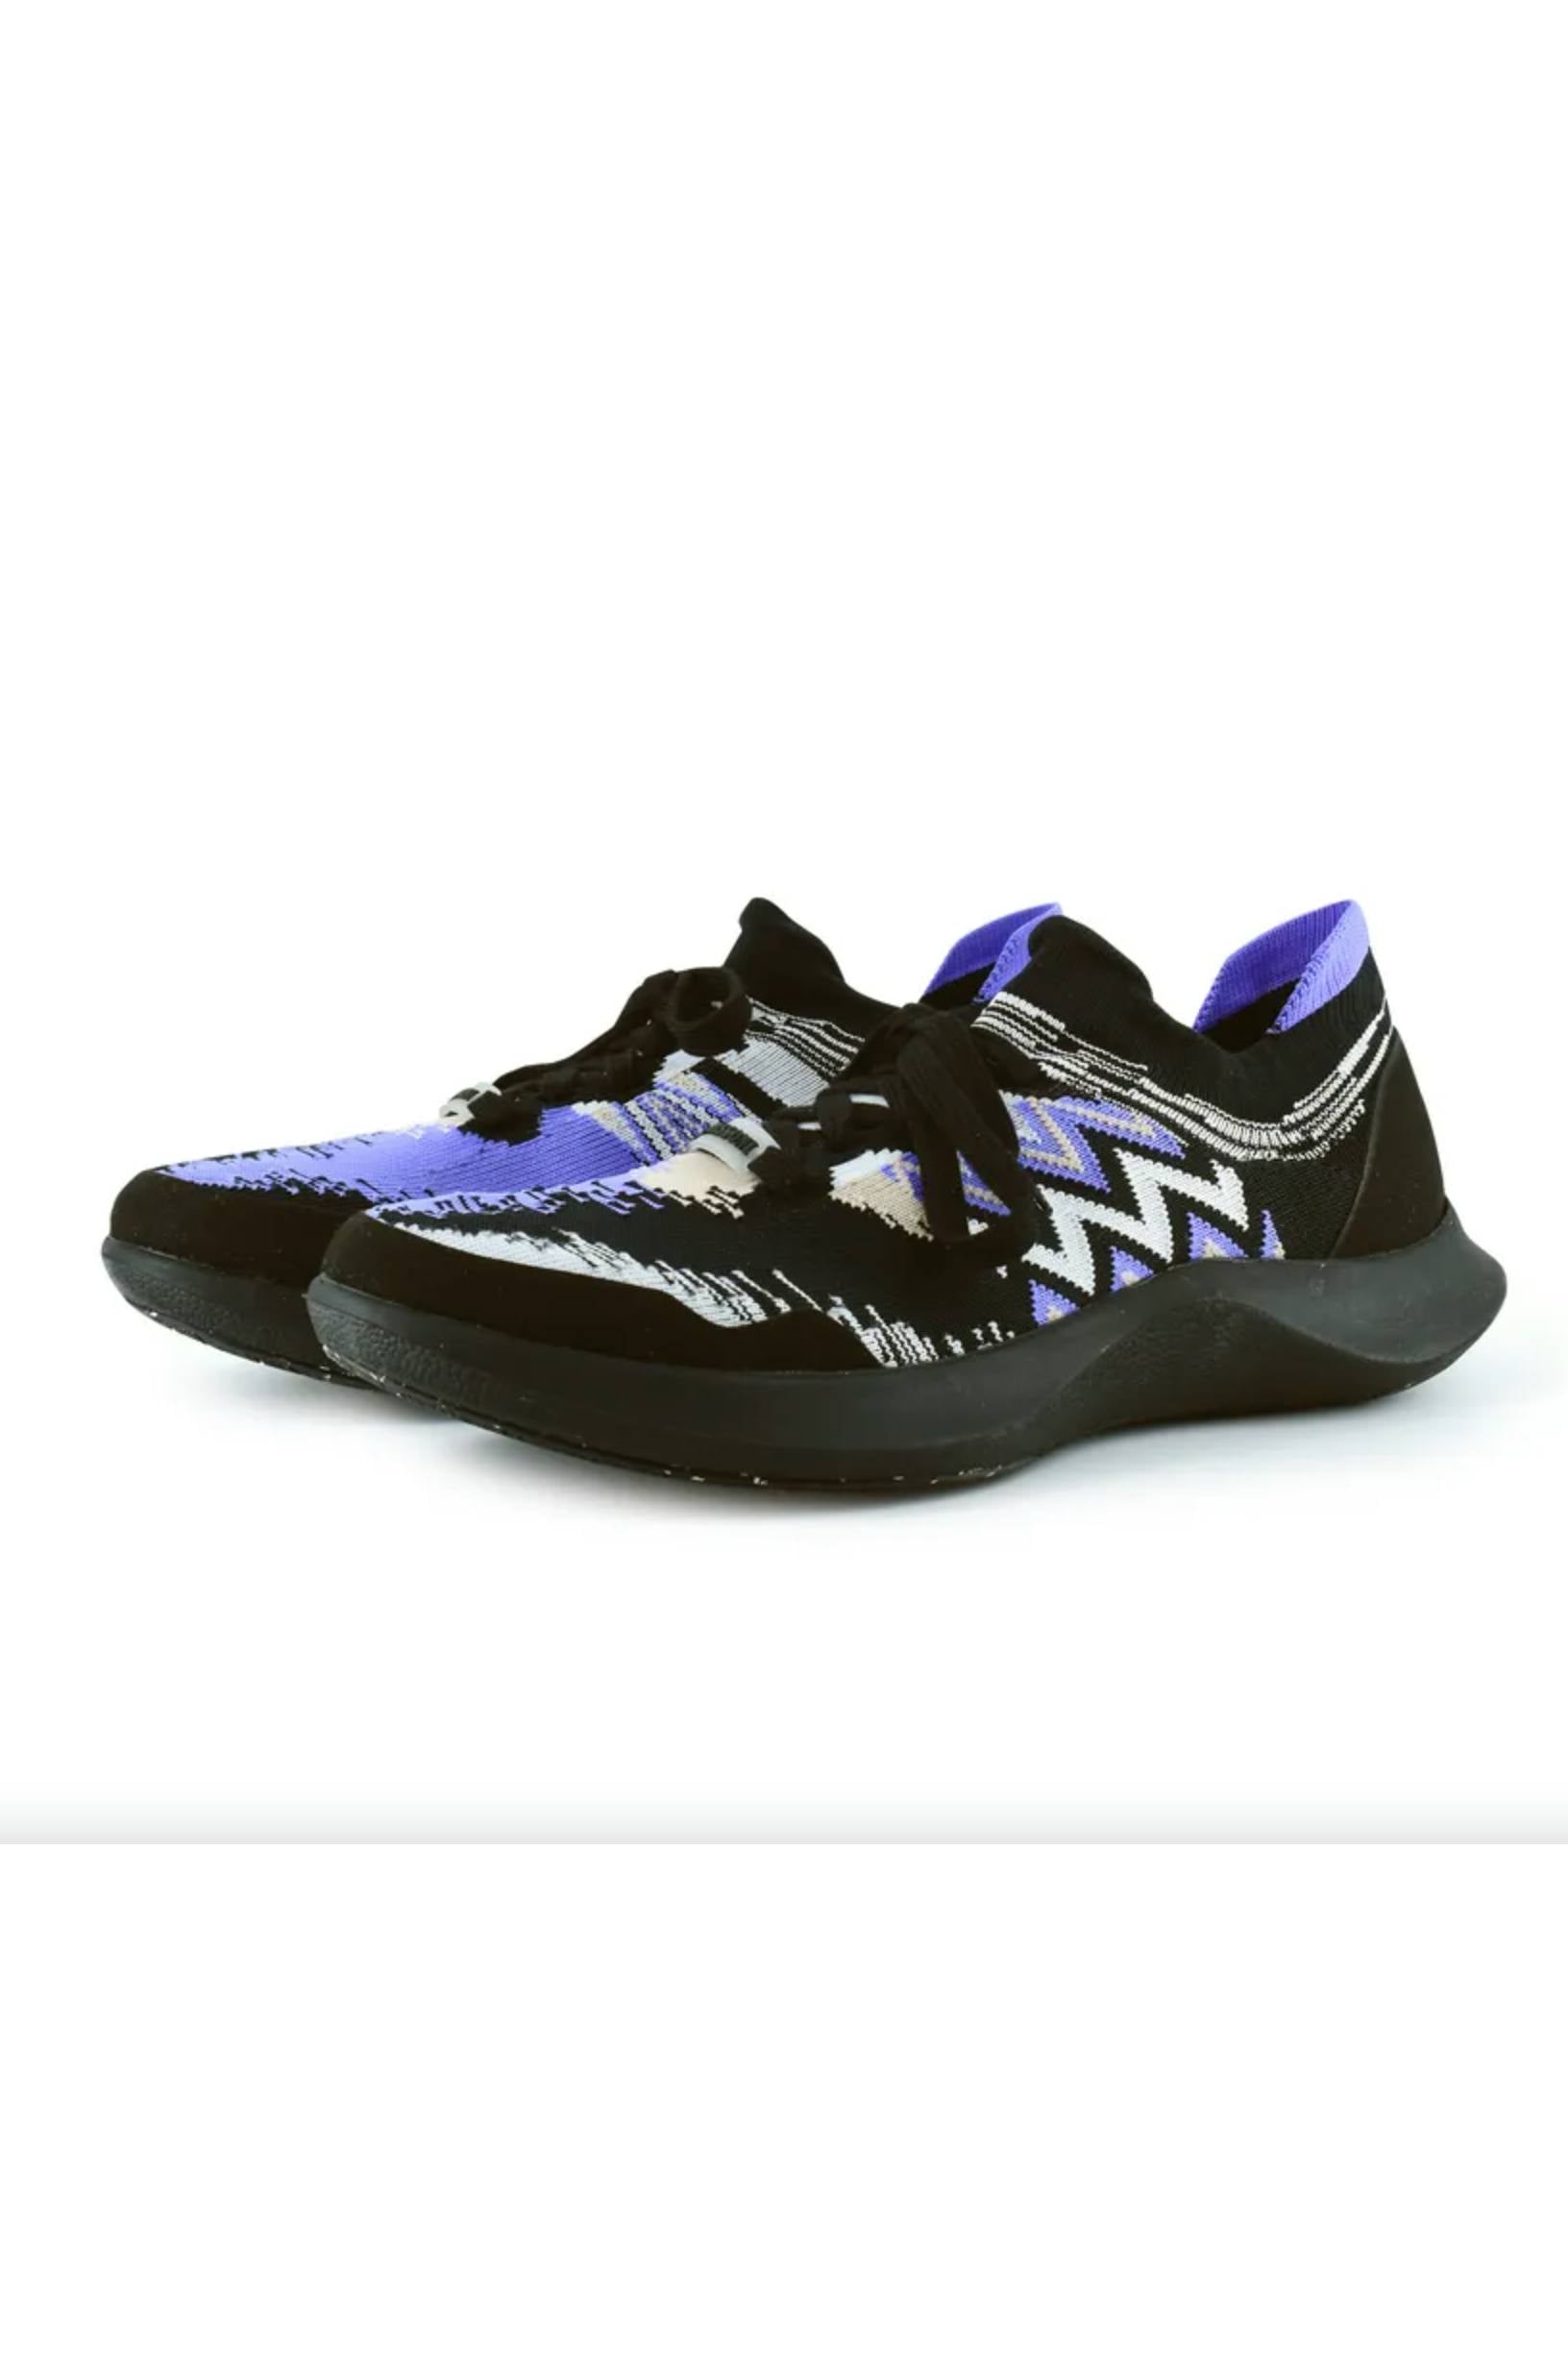 Missoni ACBC The Fly Sneaker Black